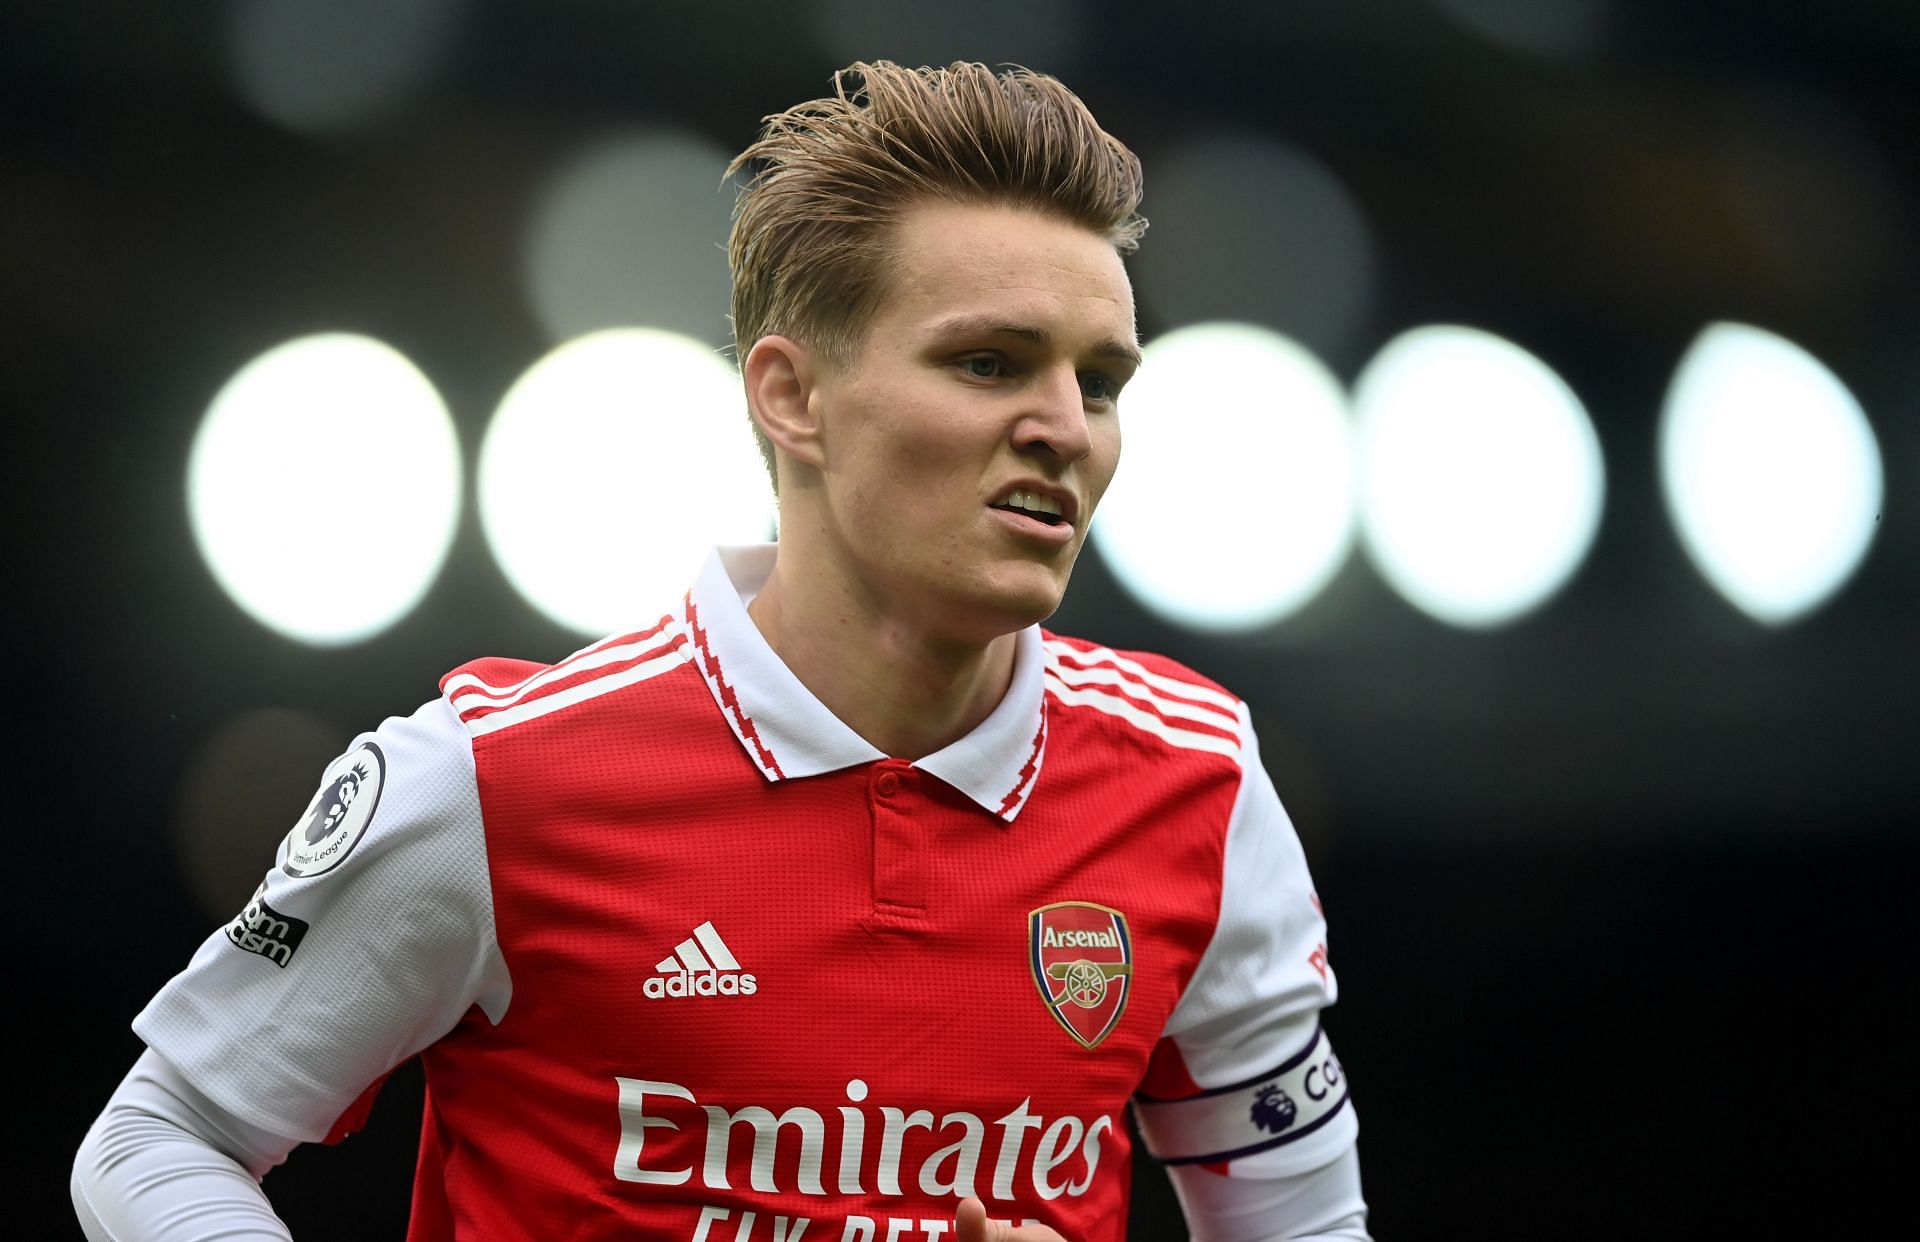 Martin Odegaard has been a first-team regular this season at the Emirates.